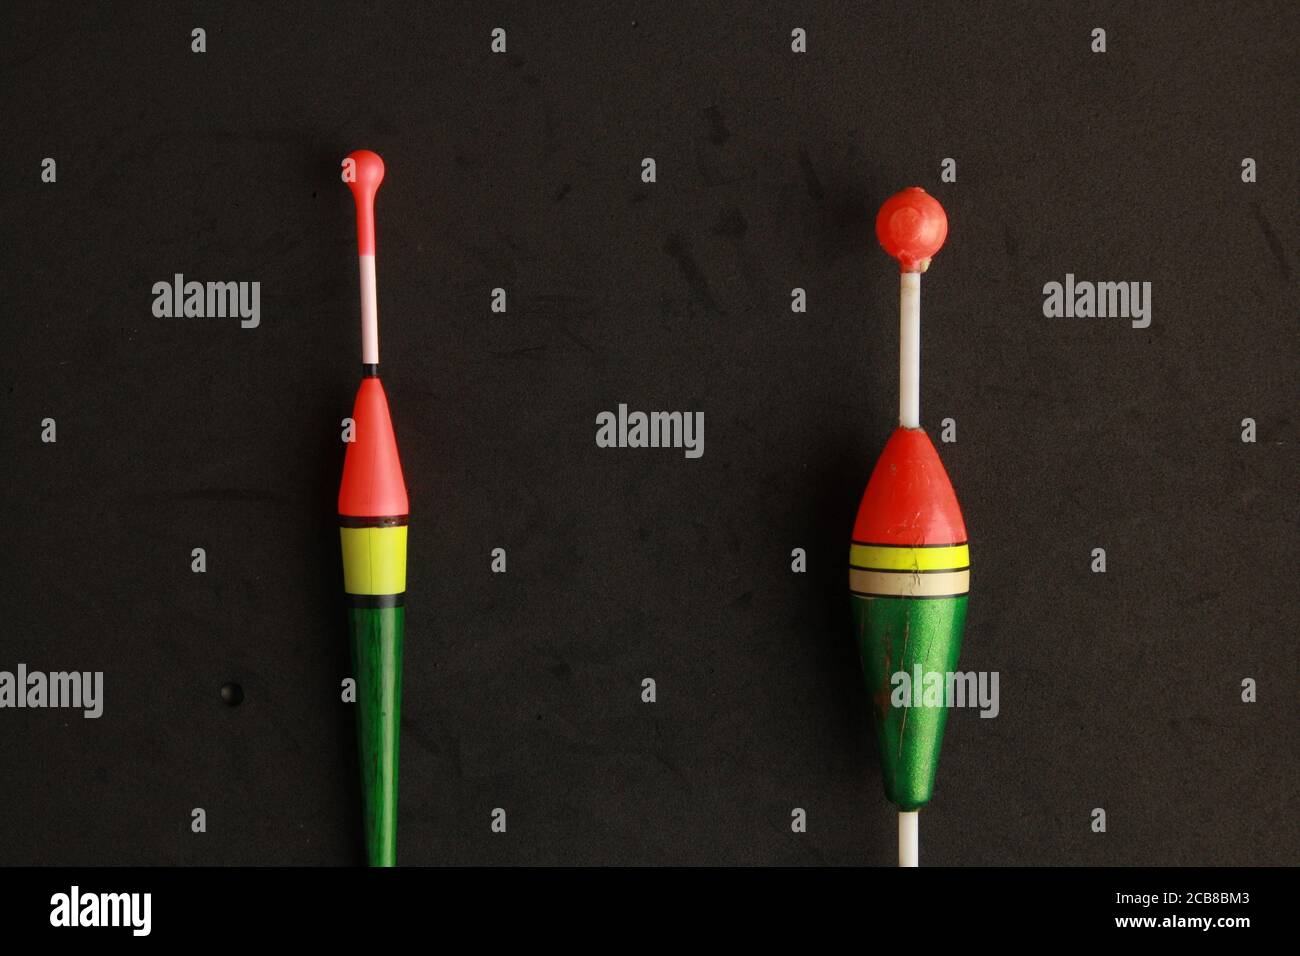 Top view of two colorful fishing rod bobbers on a black background